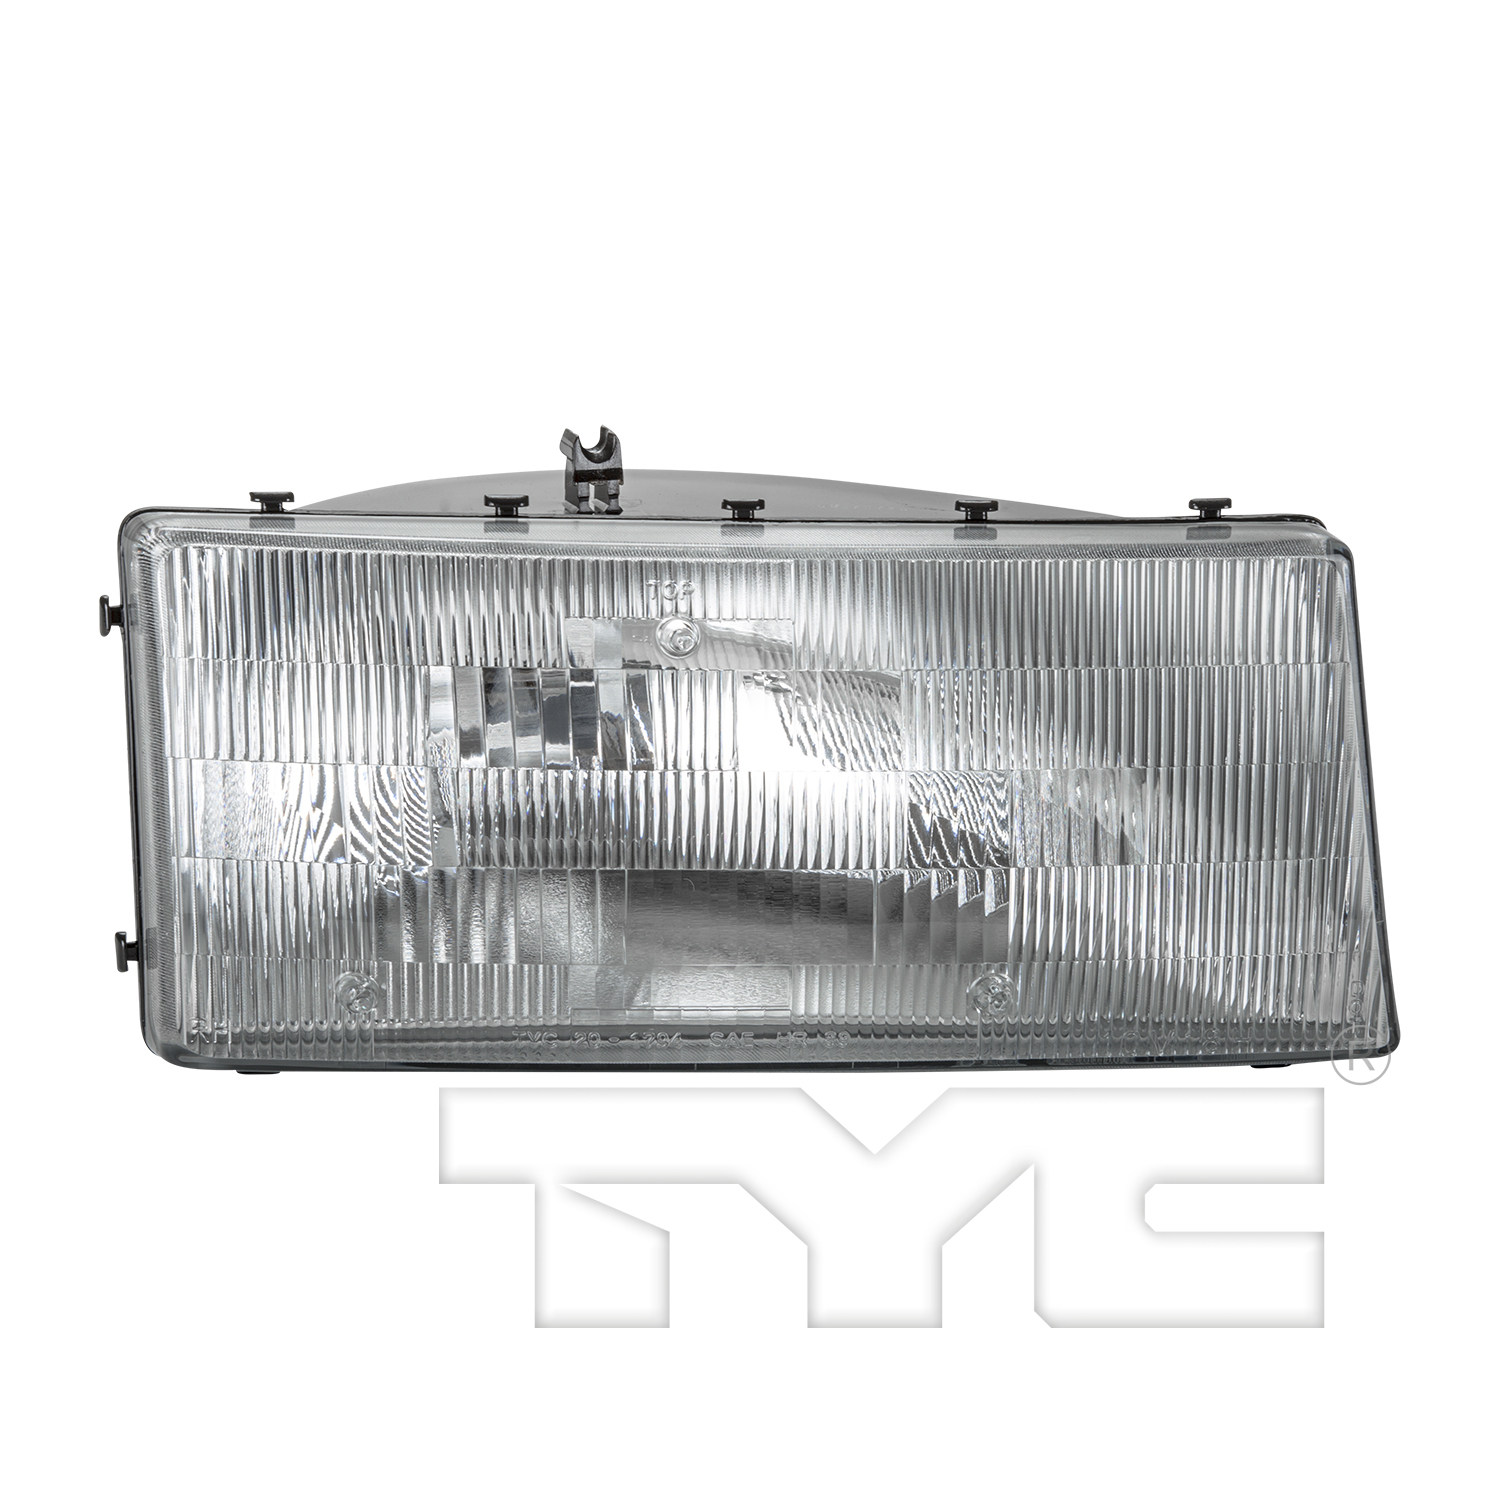 Aftermarket HEADLIGHTS for PLYMOUTH - ACCLAIM, ACCLAIM,89-94,RT Headlamp lens/housing